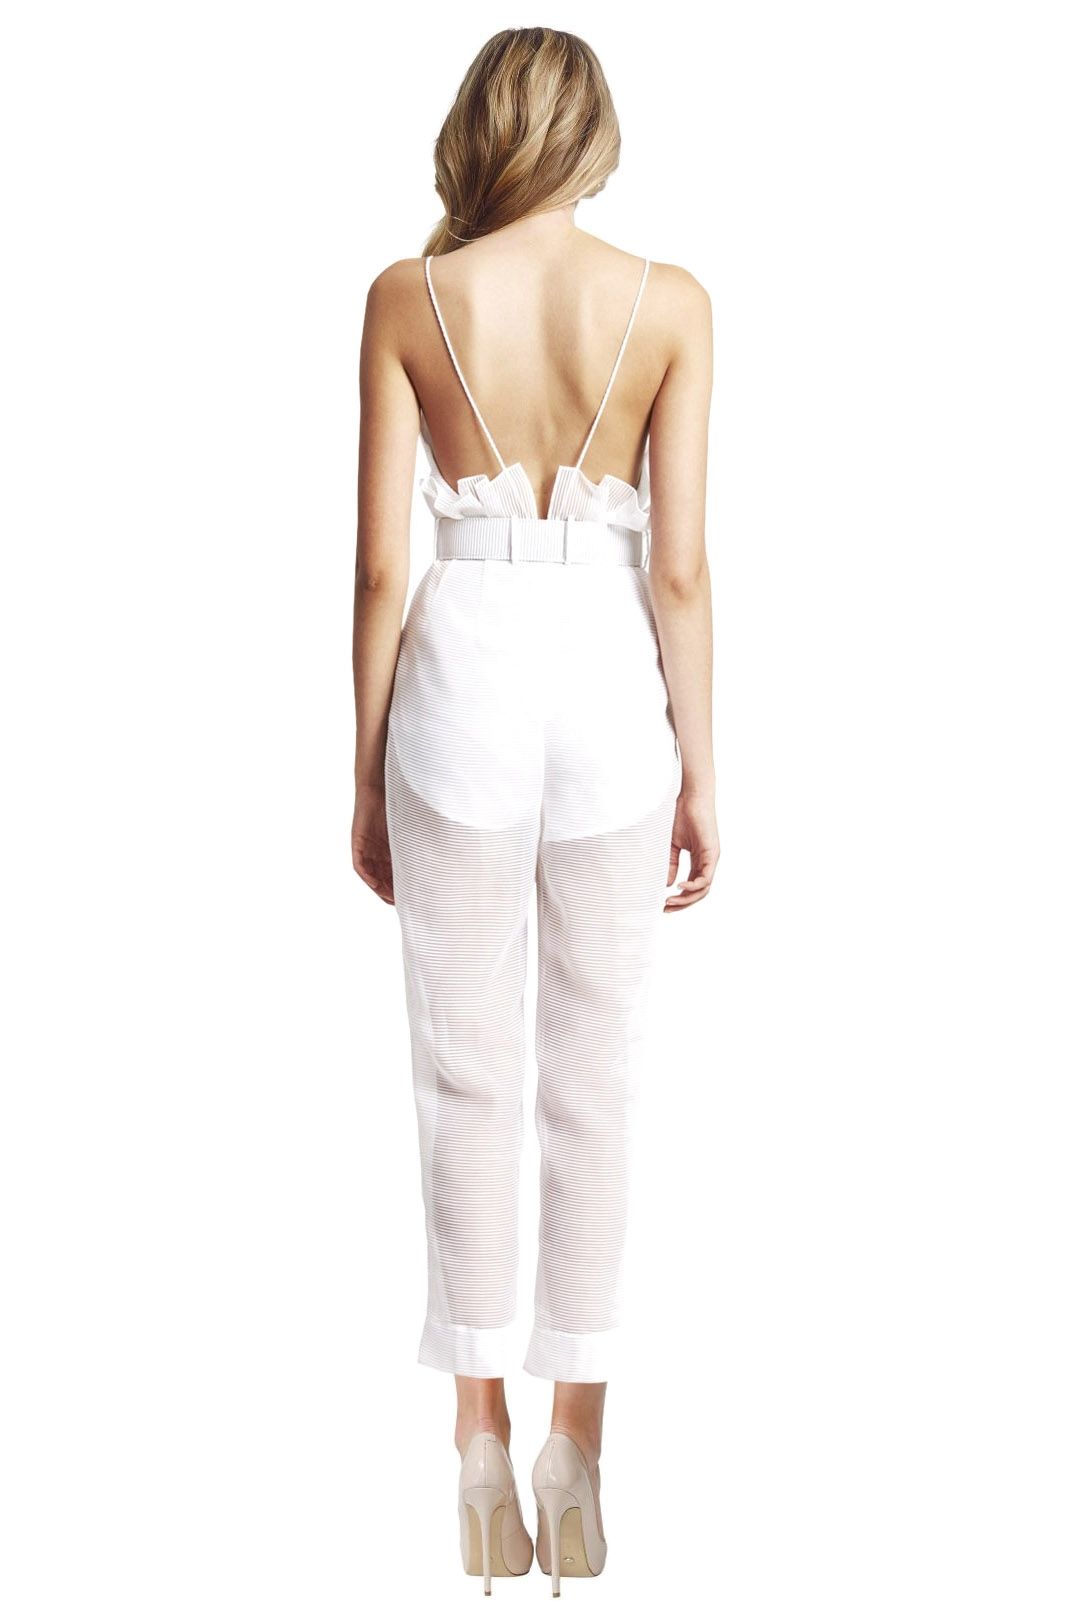 Justify My Love Jumpsuit by Alice McCall for Rent | GlamCorner